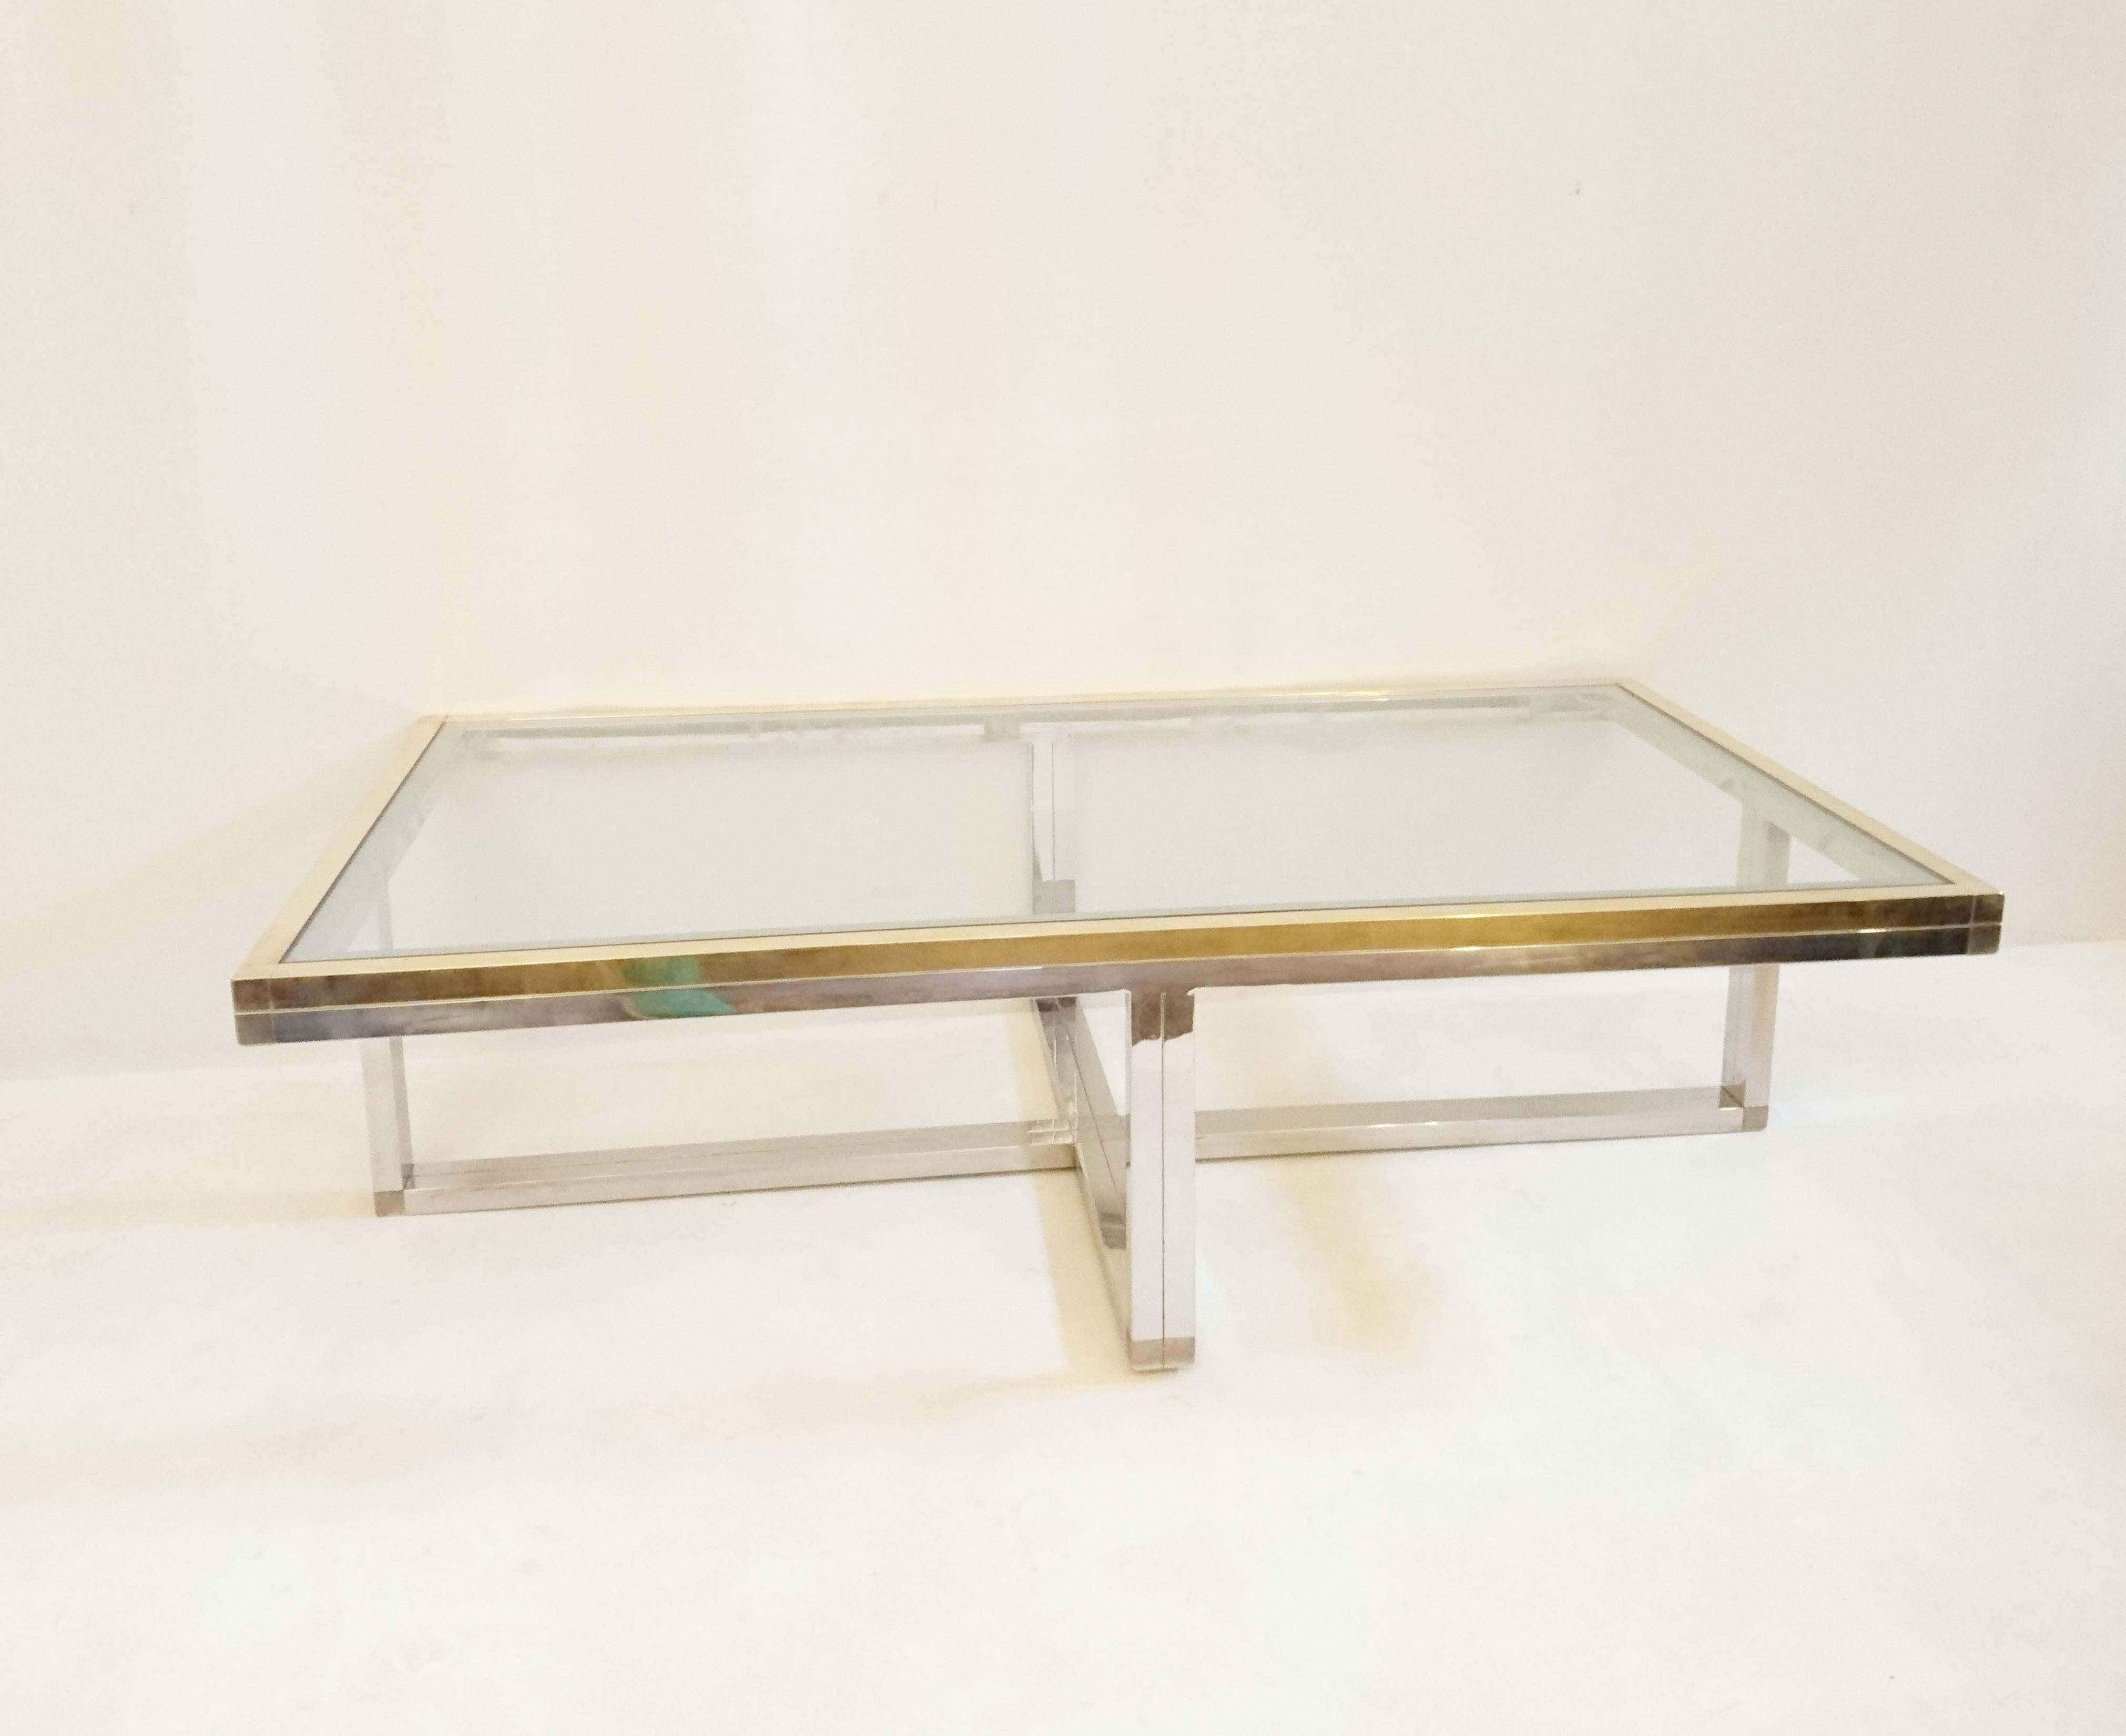 Coffee table in Classic Romeo Rega design in brass and chrome with a clear glass top.